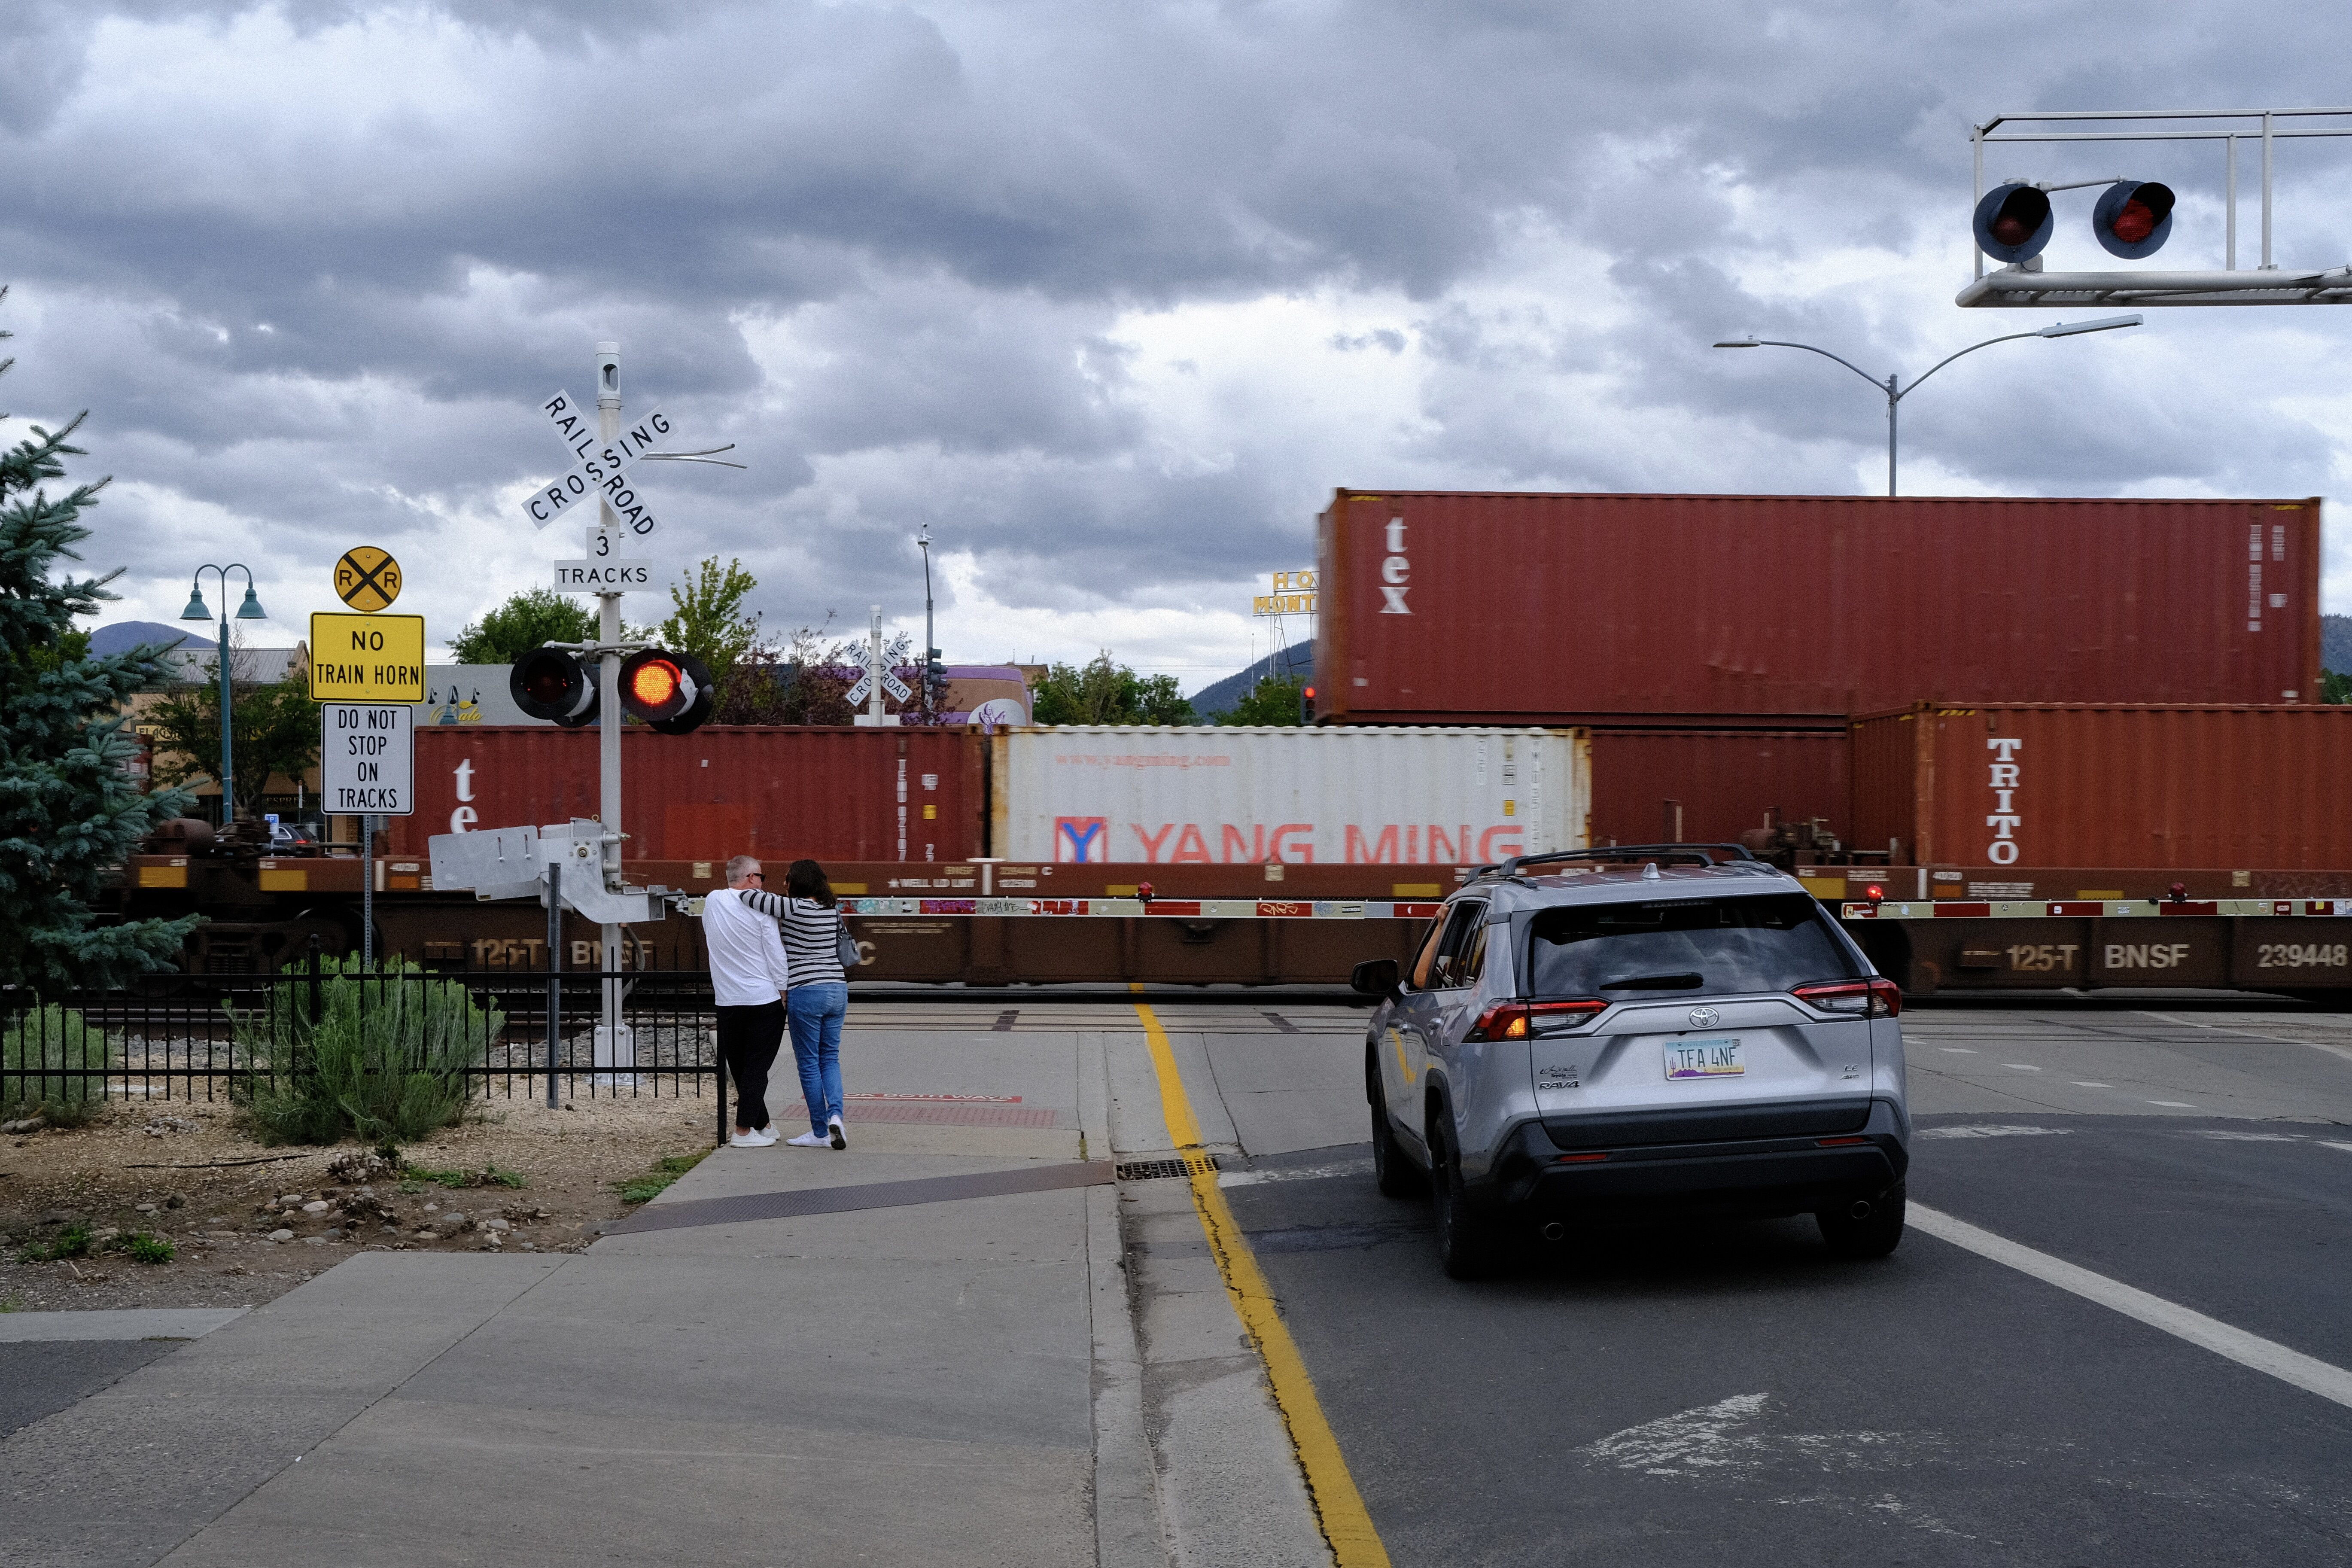 A person leans lightly against a railroad crossing signpost, facing away. Another person leans slightly on them. The crossing gate is down and two trains are passing, in opposite directions, on the tracks ahead of them.